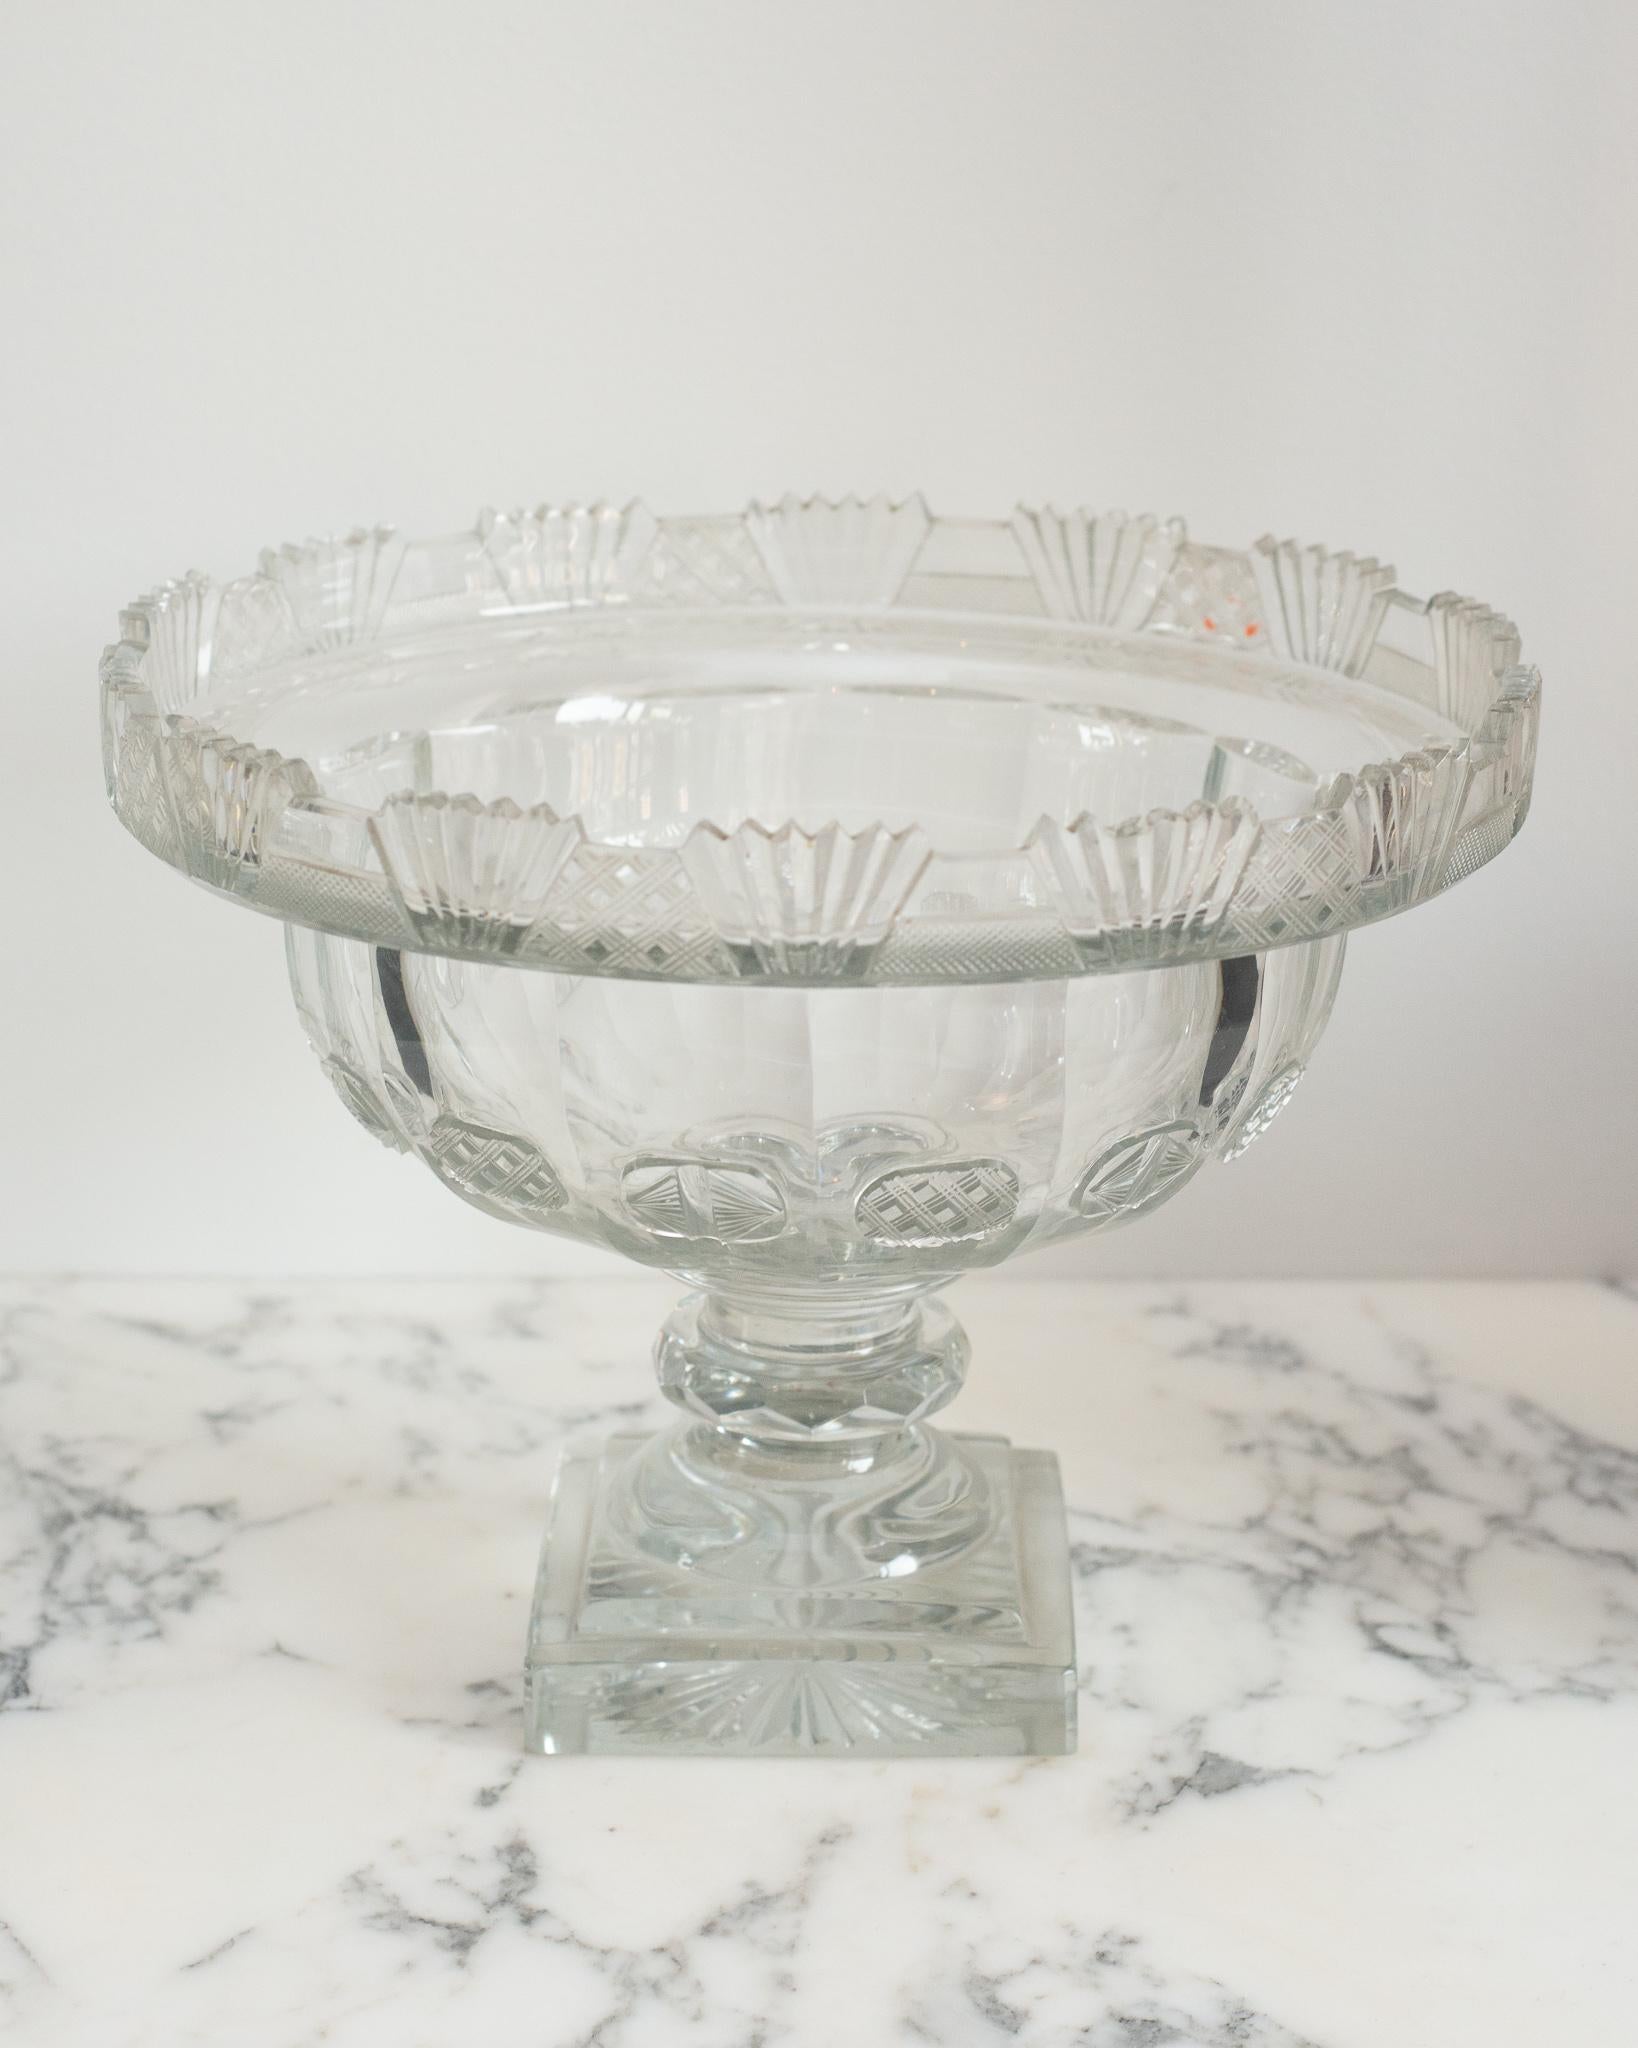 This antique Irish large cut crystal decorative bowl is a Classic accessory that is easy to place in any home. Perfect for serving or decoration, it can be filled fruit or floating flowers.